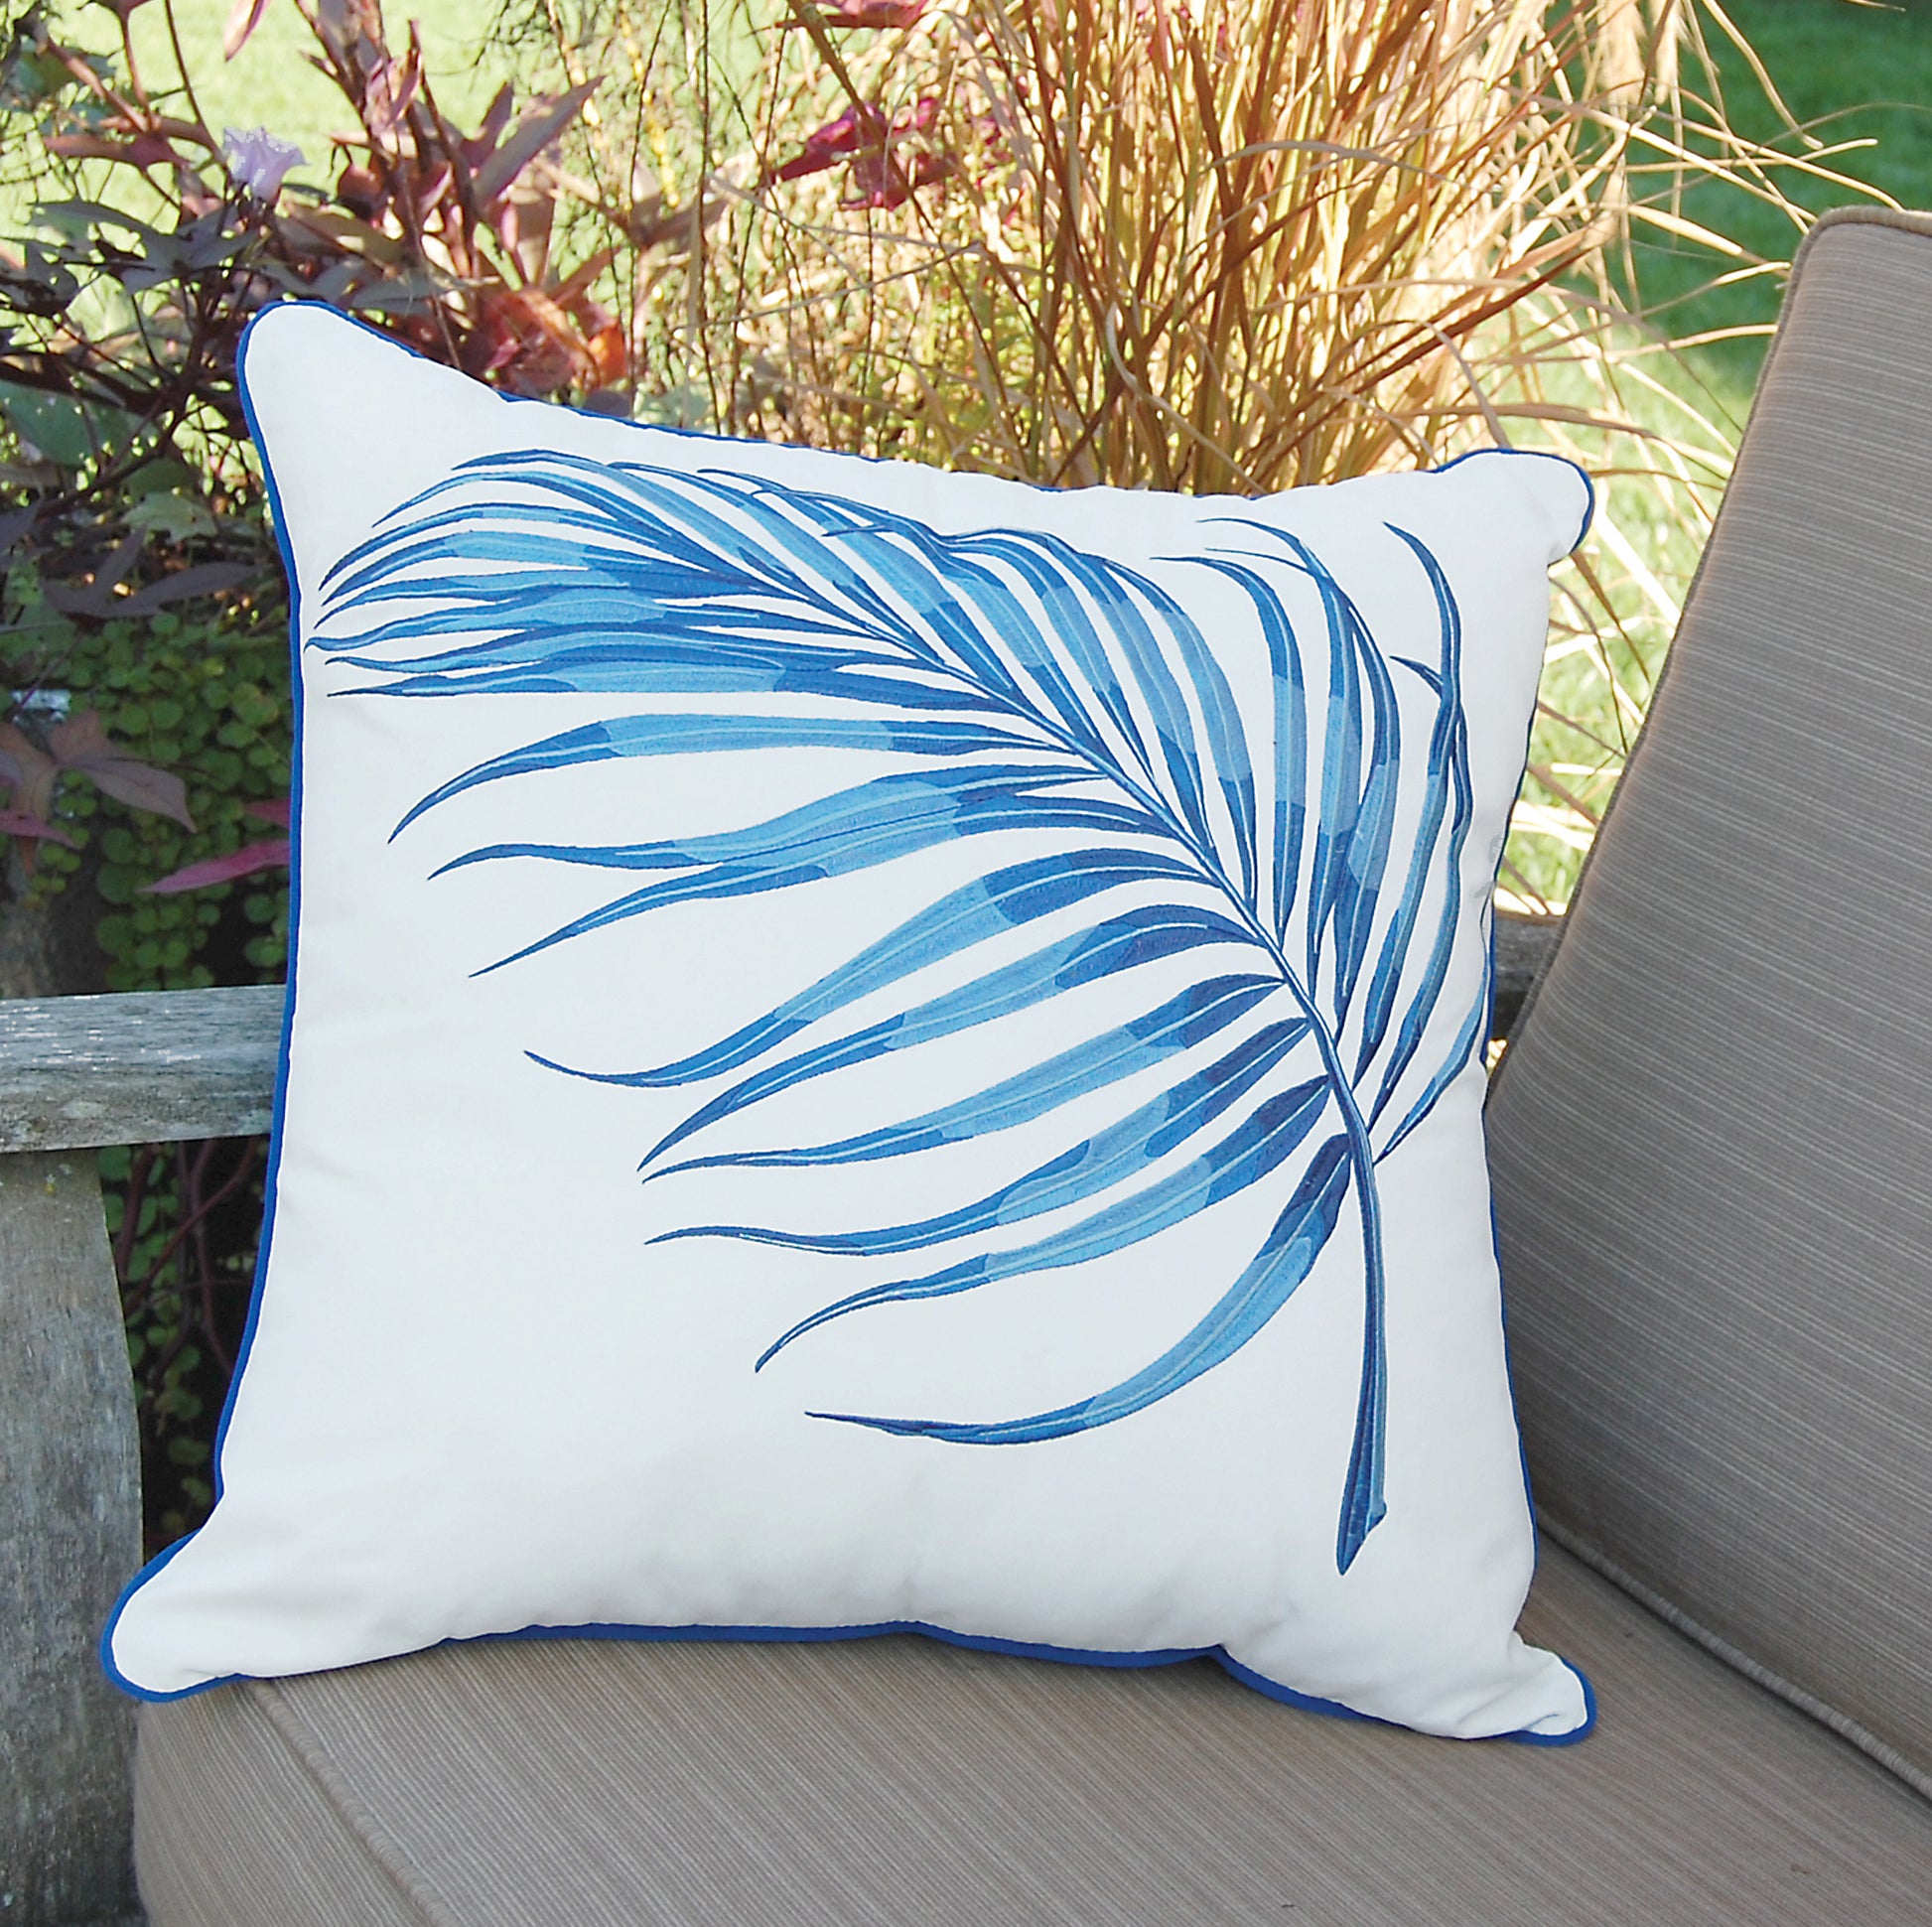 Blue parlor palm outdoor pillow styled on a patio chair next to tall grass.